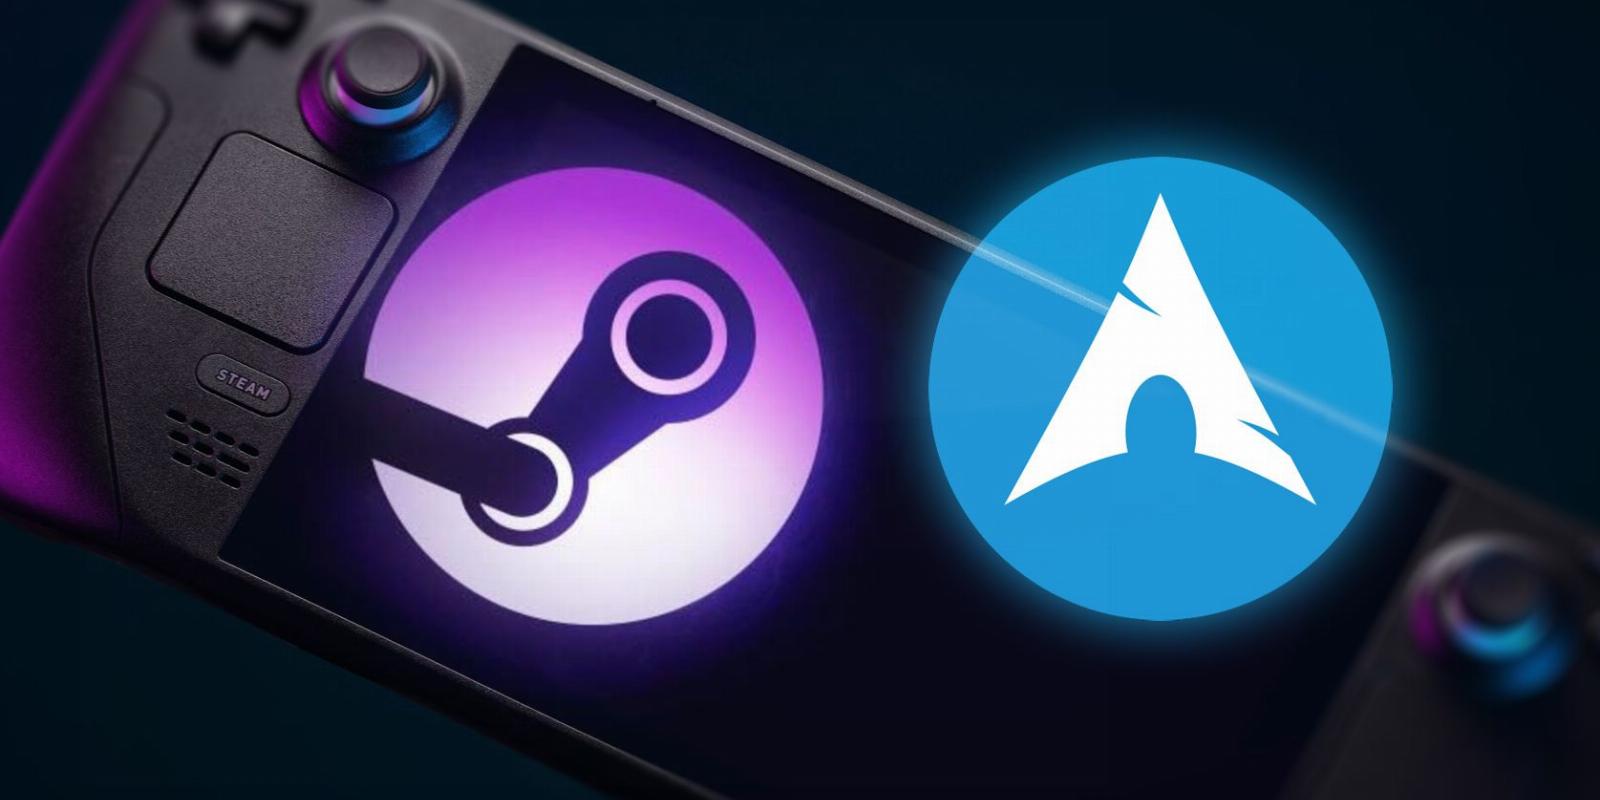 5 Key Differences Between SteamOS and Arch Linux